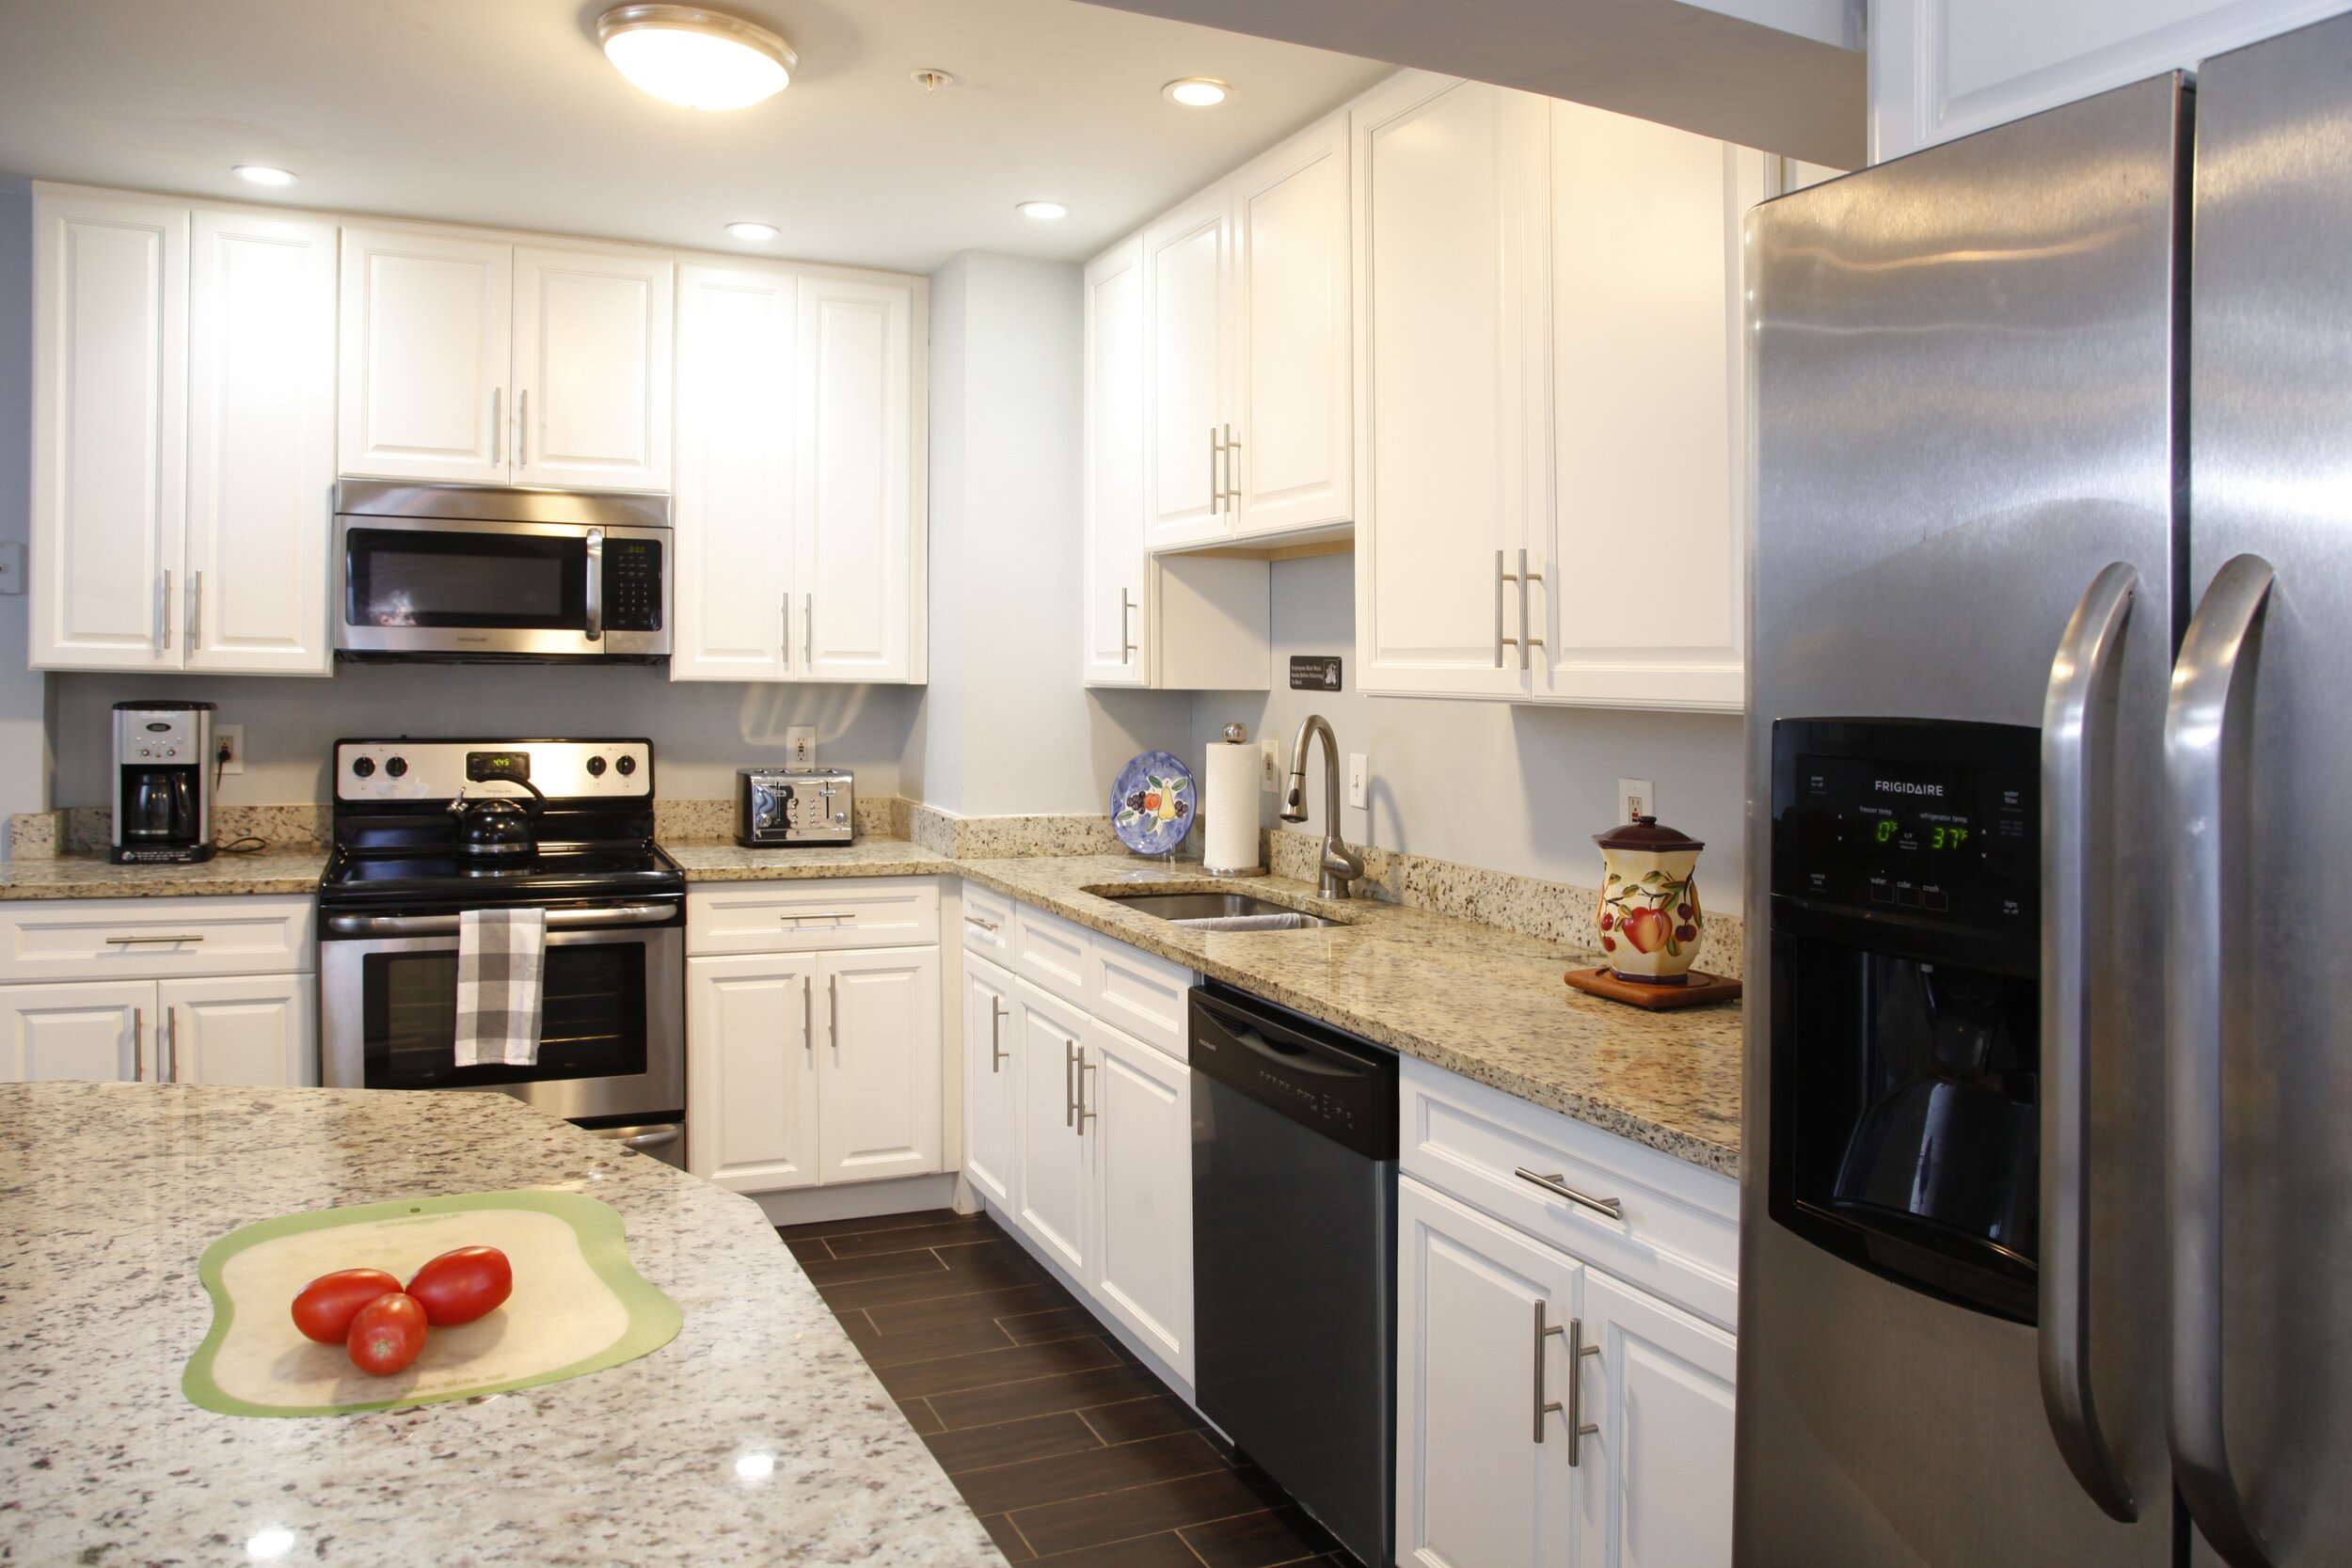  Featuring stainless steel appliances and granite counter tops, any meal cooked in this kitchen is sure to be divine! 